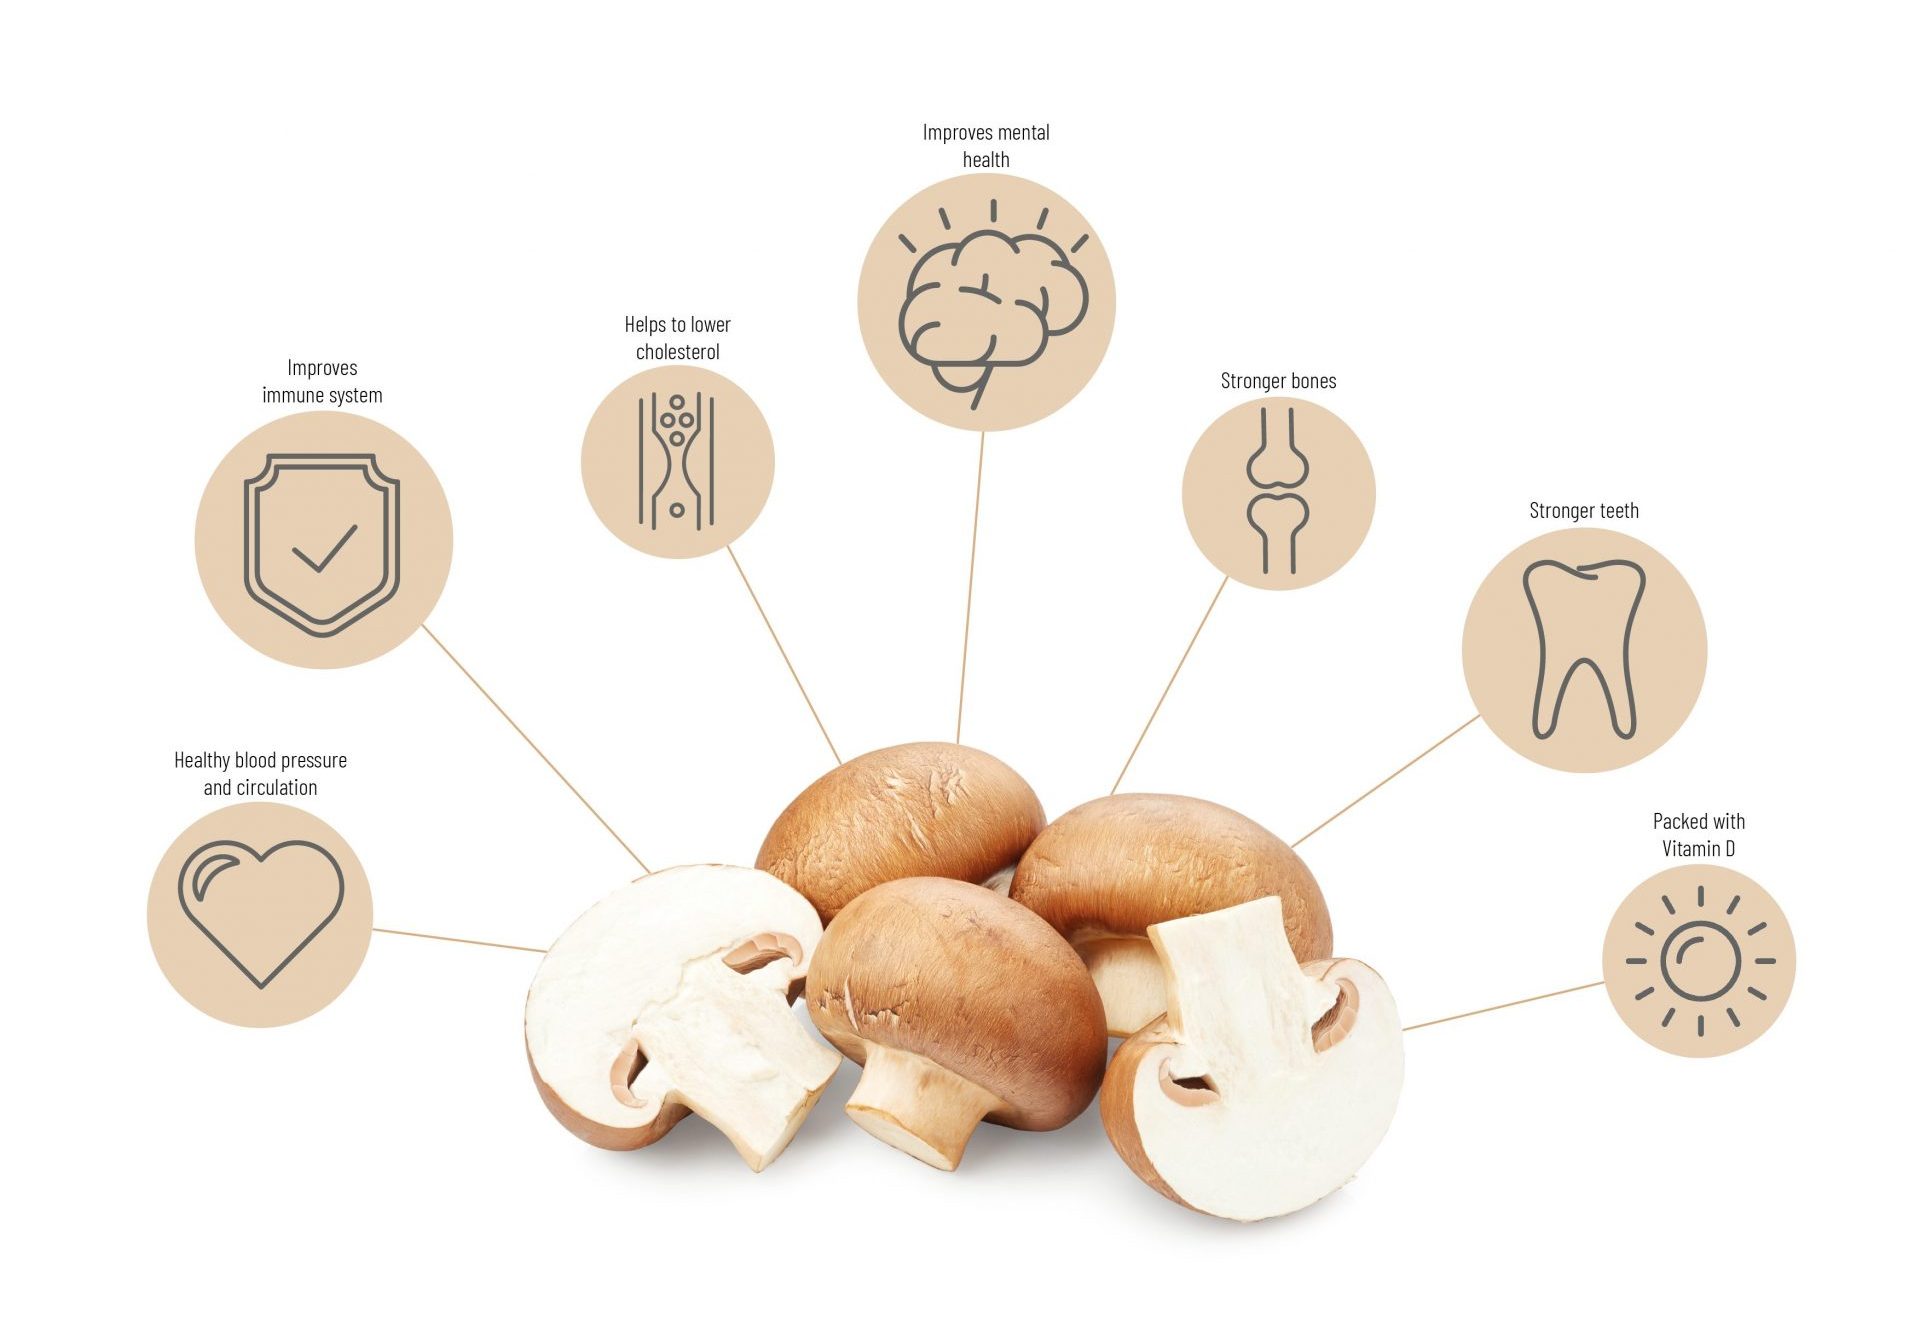 innovation Graphic which shows that mushrooms are rich in nutrients